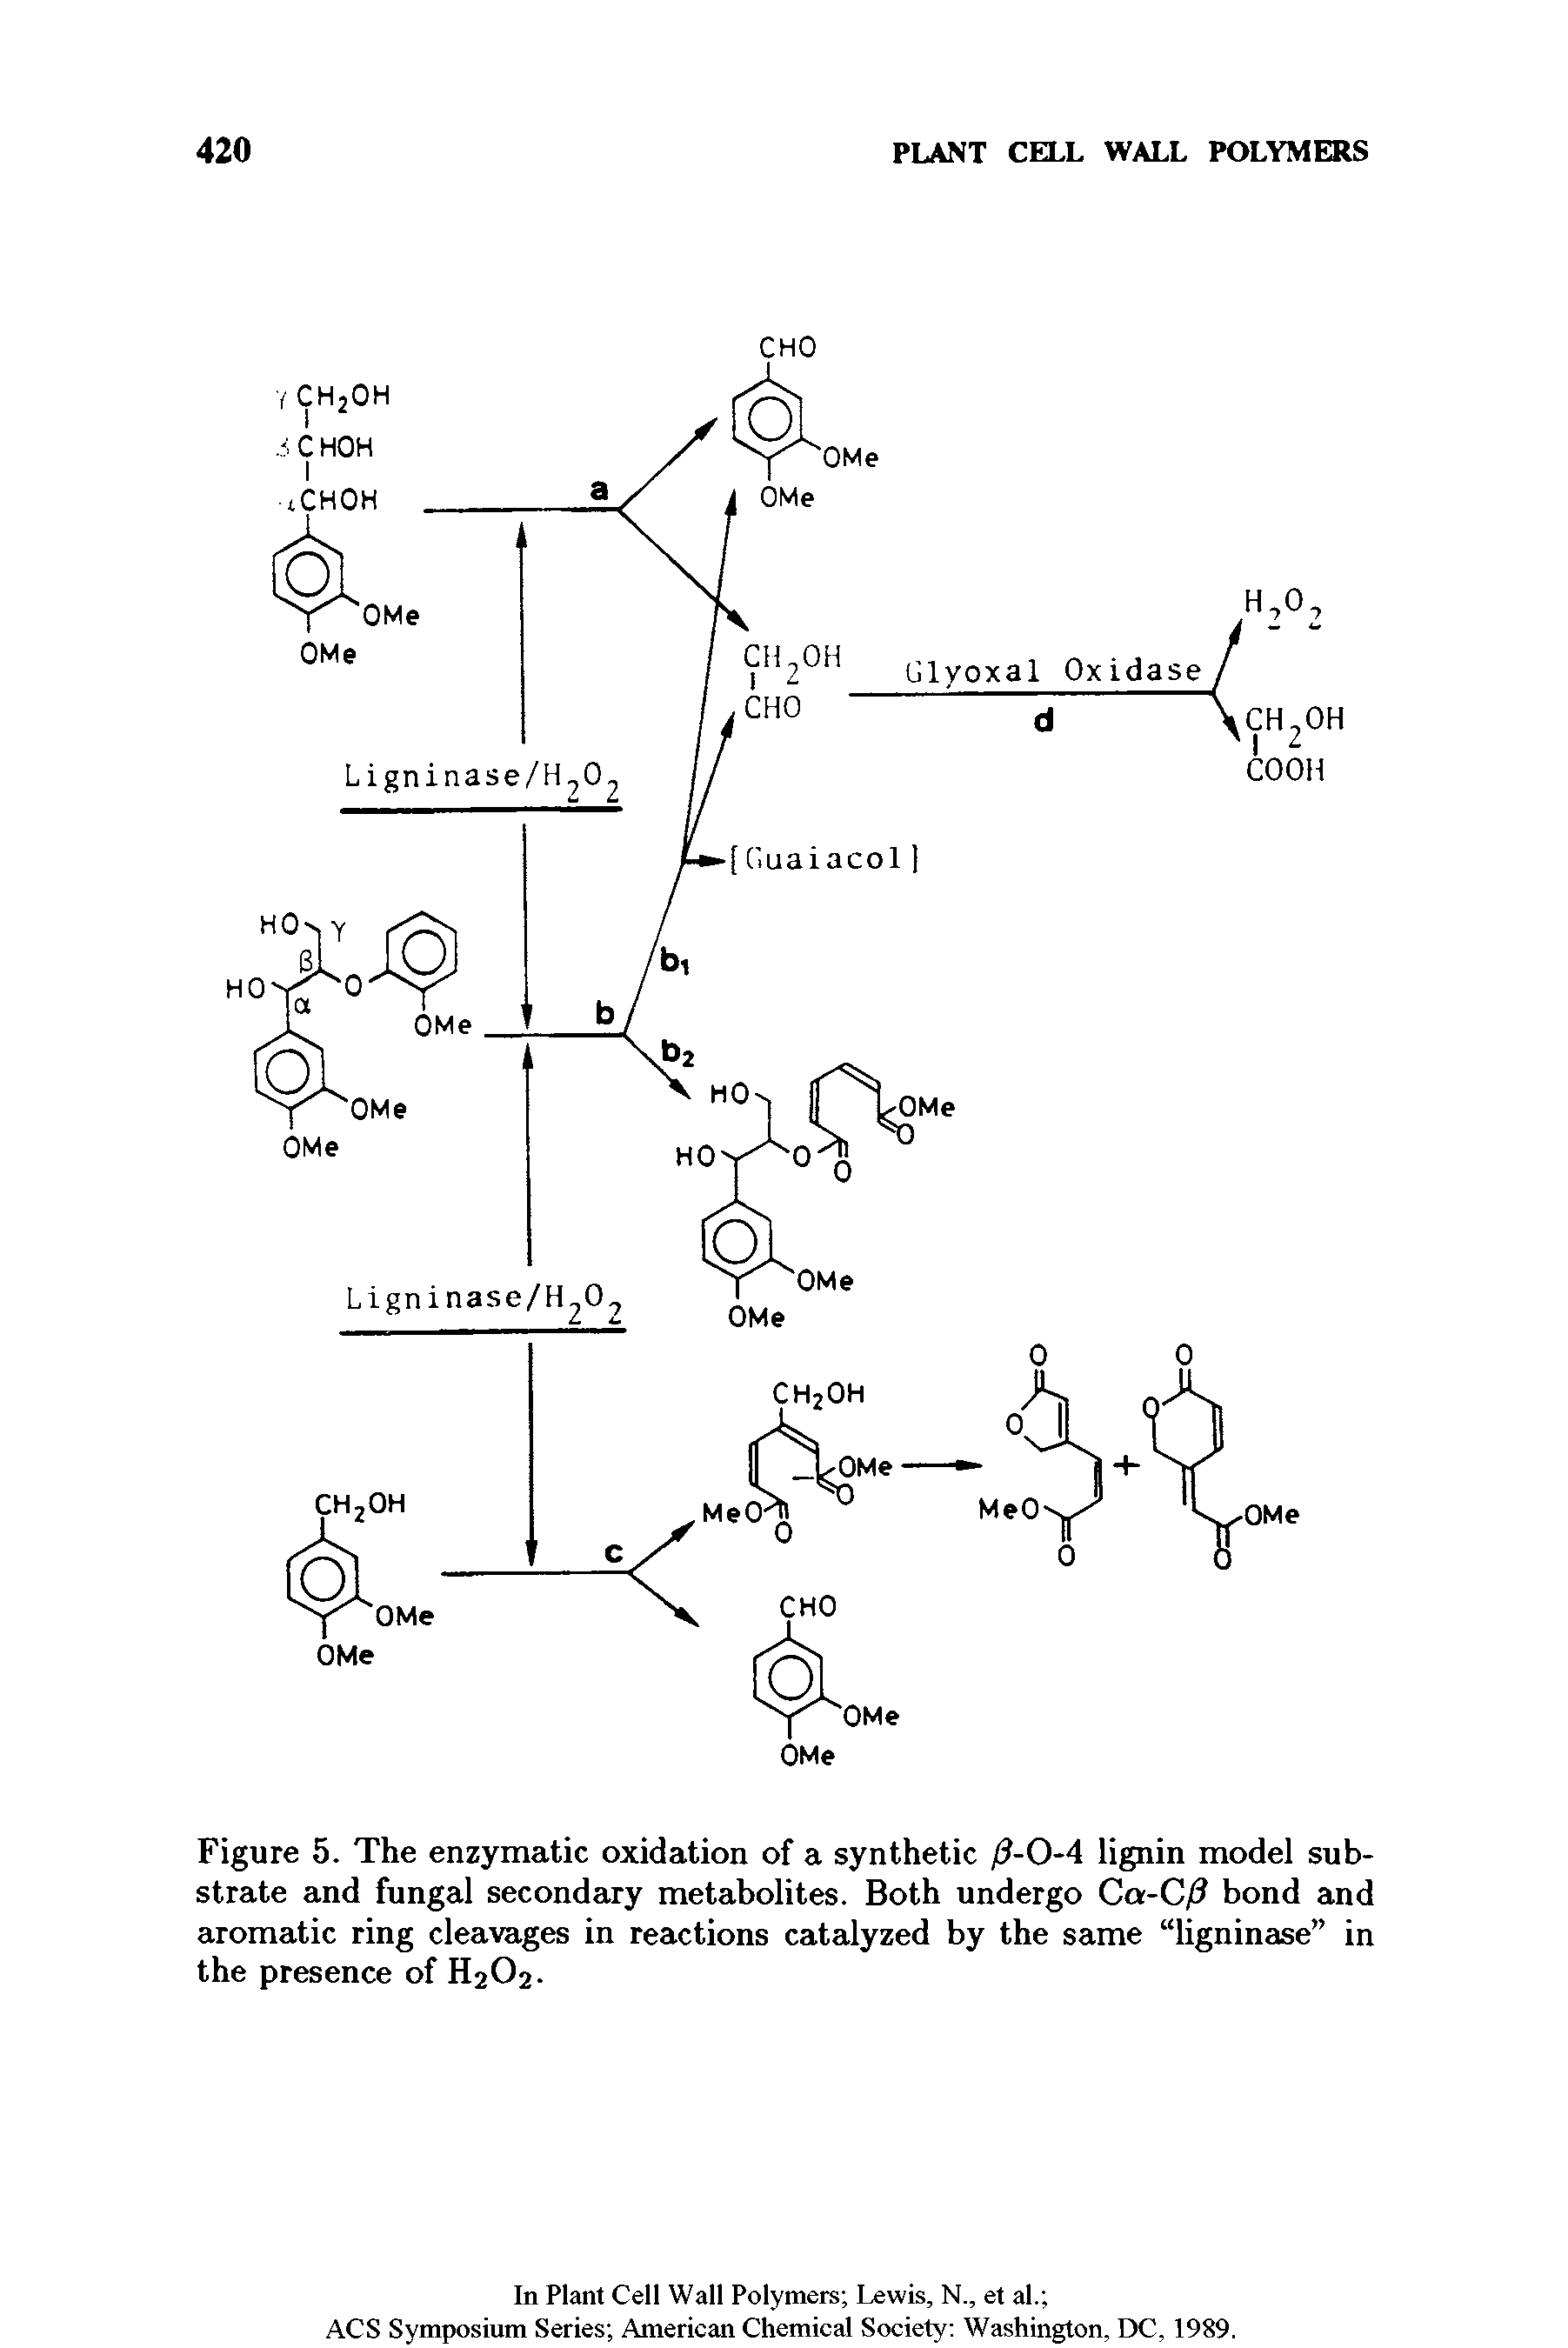 Figure 5. The enzymatic oxidation of a synthetic / -0-4 lignin model substrate and fungal secondary metabolites. Both undergo Ca-C/ bond and aromatic ring cleavages in reactions catalyzed by the same ligninase in the presence of H2O2.